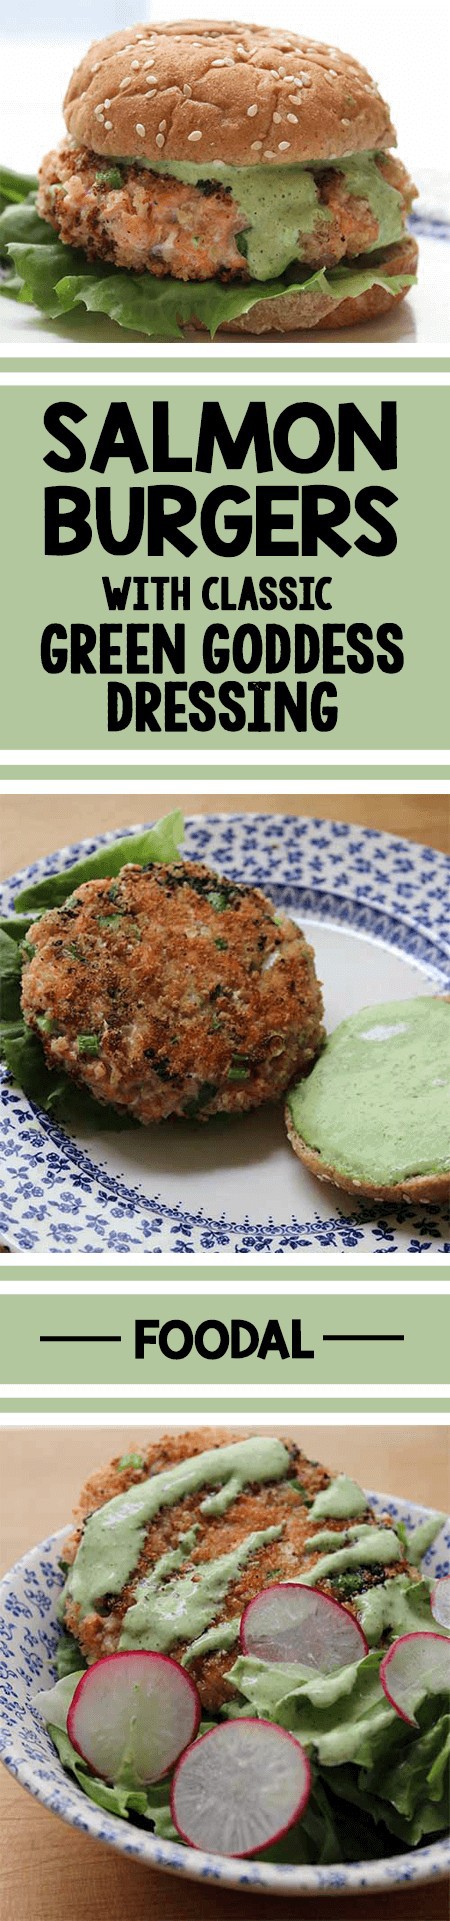 This delicious dish is fun and healthy, and full of vitamins and omega 3. The Green Goddess dressing compliments the Salmon Burger perfectly. It’s also a lot easier to make than you would think. I know I always say that, but it is! Get the recipe now. https://foodal.com/recipes/fish-and-seafood/green-goddess-salmon-burgers/